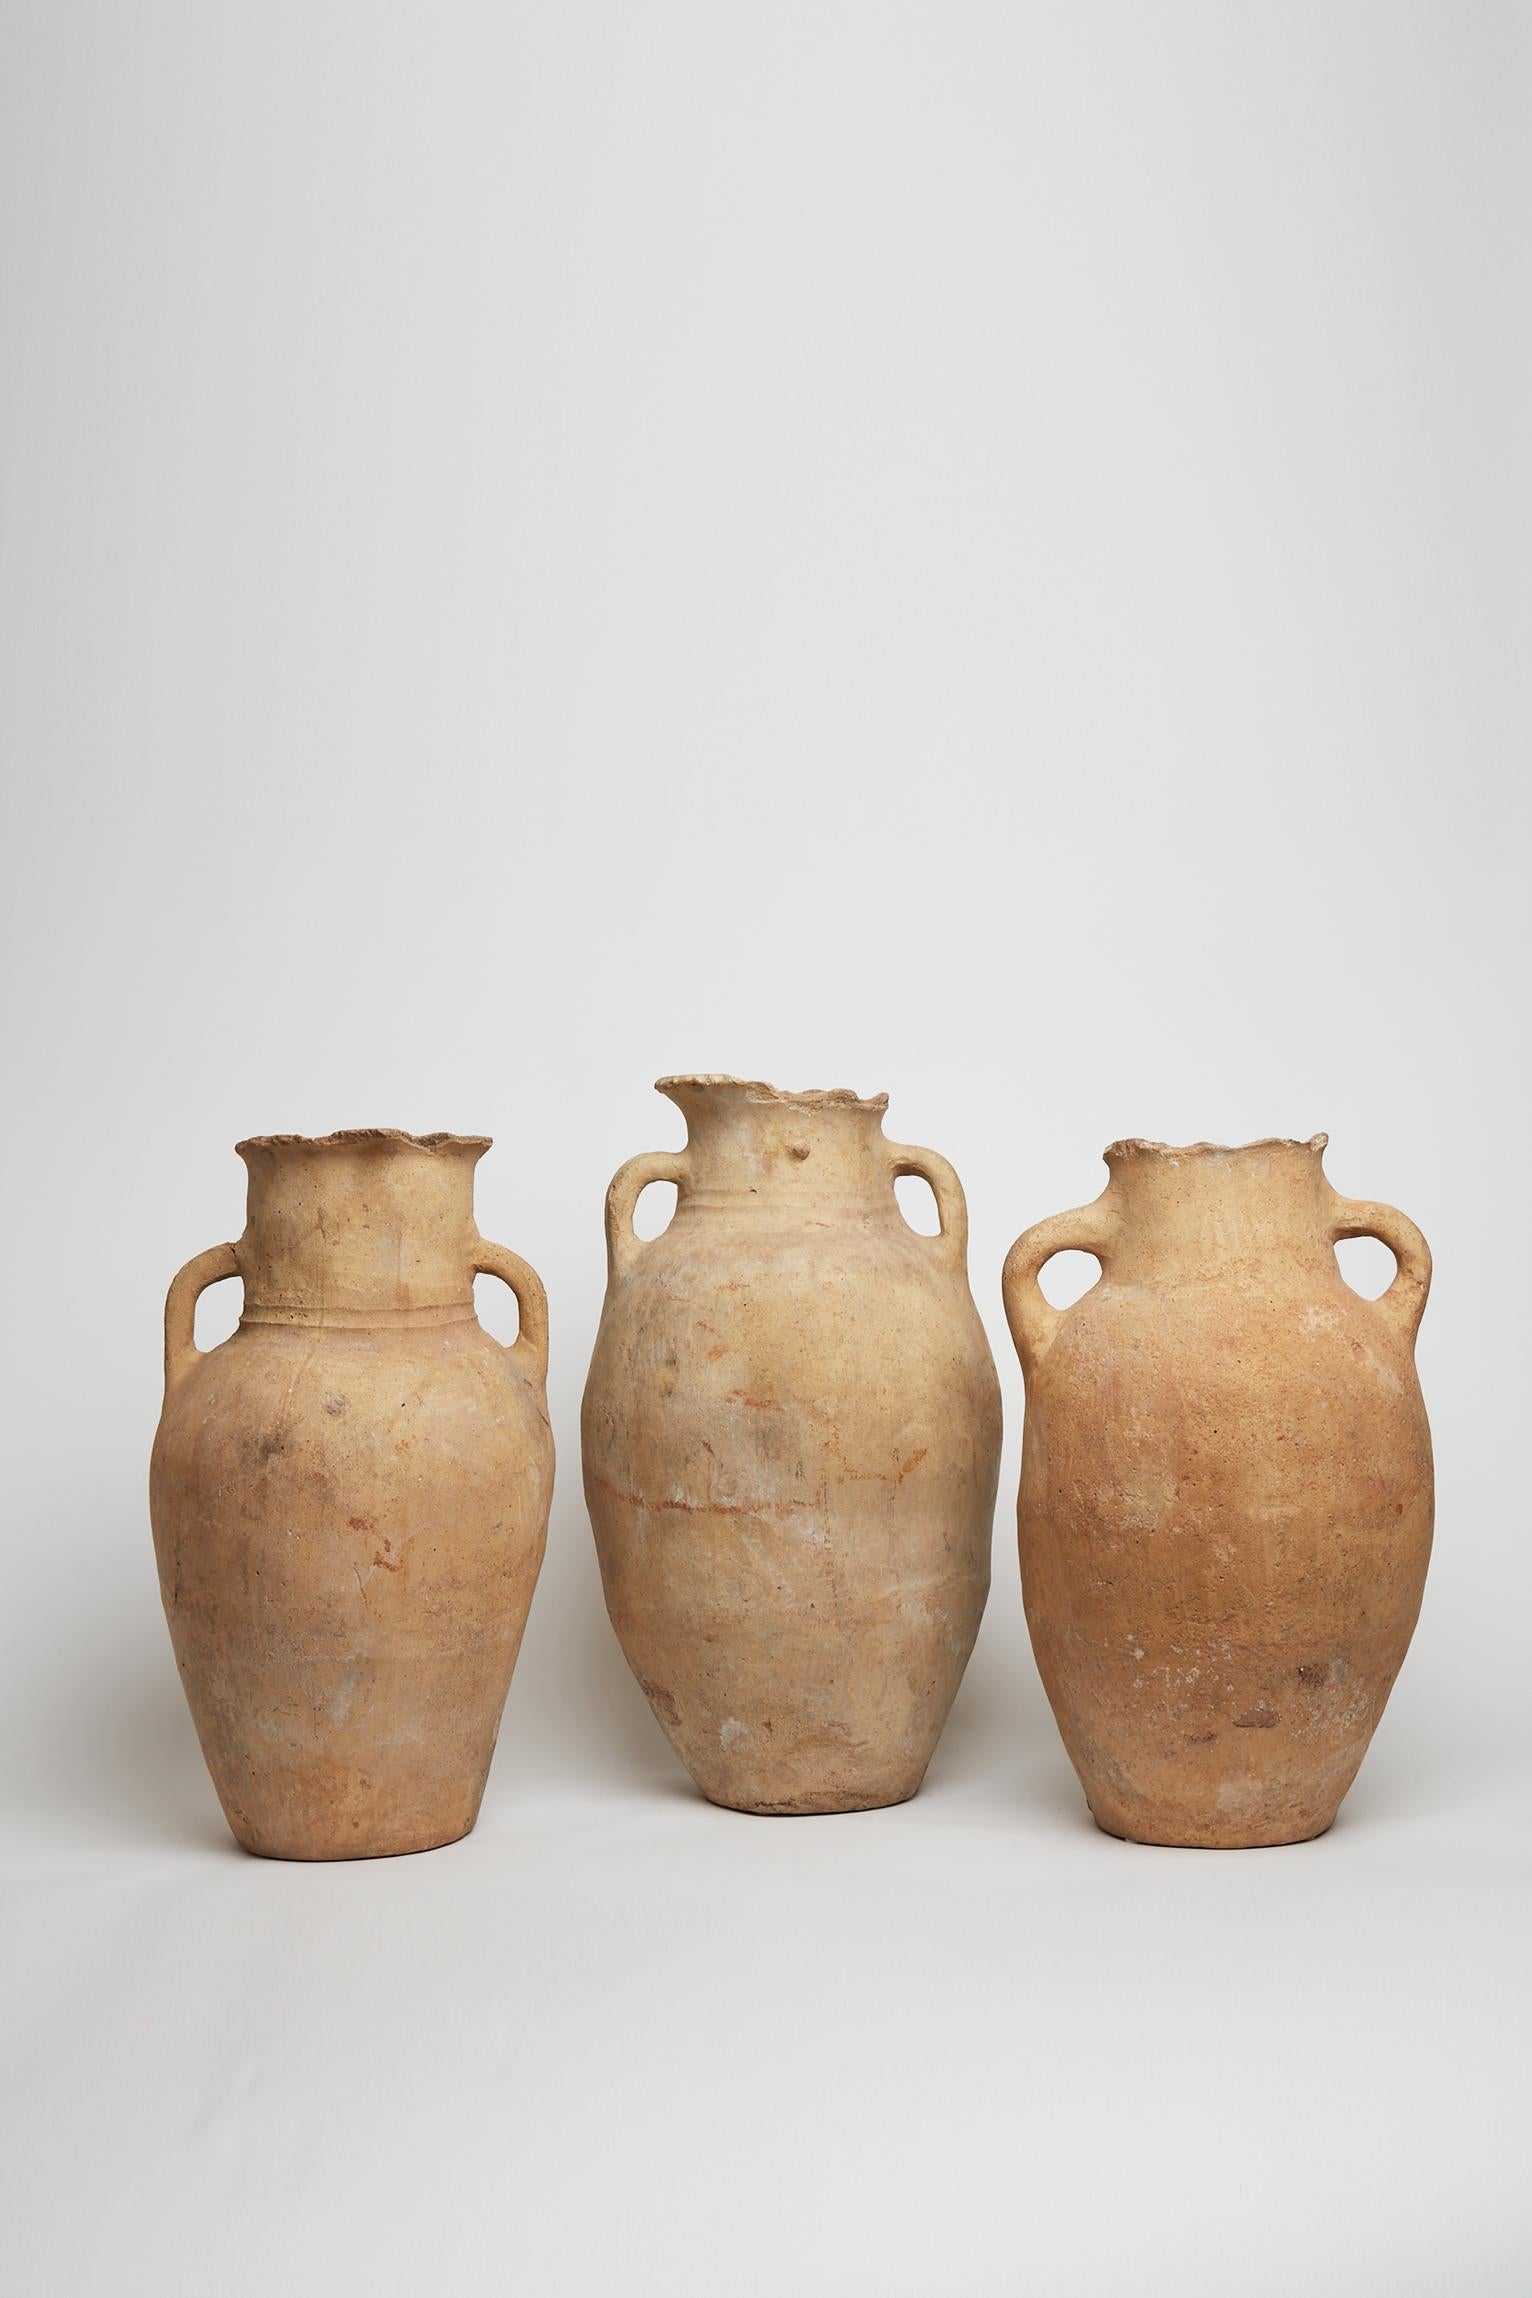 An imposing group of three superb terracotta jars with handles.
Near East, at least early 18th Century (most possibly earlier).
Vase 1: 56 cm high by 28 cm diameter.
Vase 2: 59 cm high by 29 cm diameter.
Vase 3: 52 cm high by 27 cm diameter.